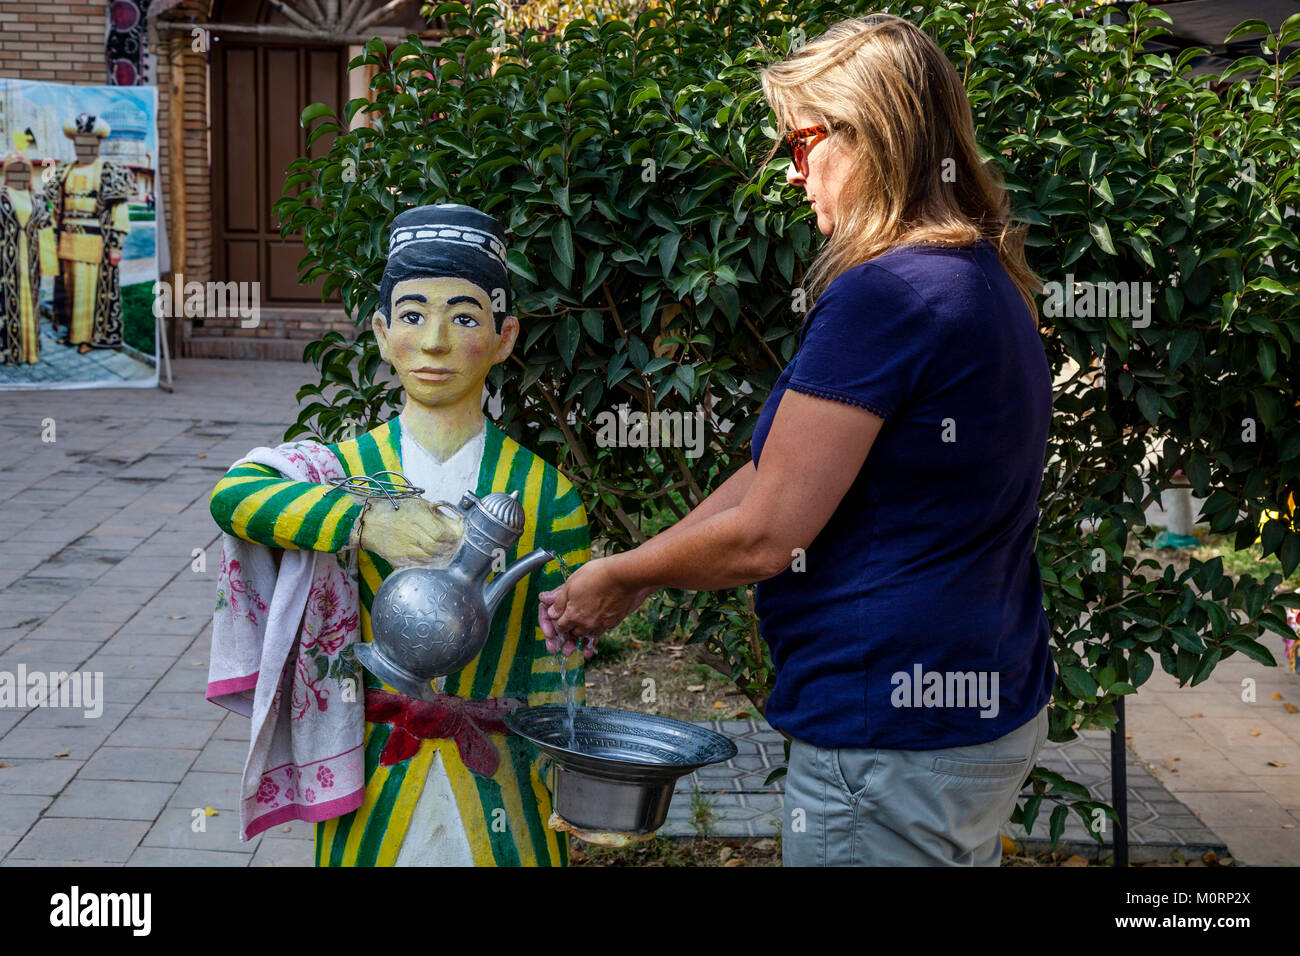 A Female Tourist Washes Her Hands At A Traditional Fountain In The Courtyard Of A Cafe, Samarkand, Uzbekistan Stock Photo